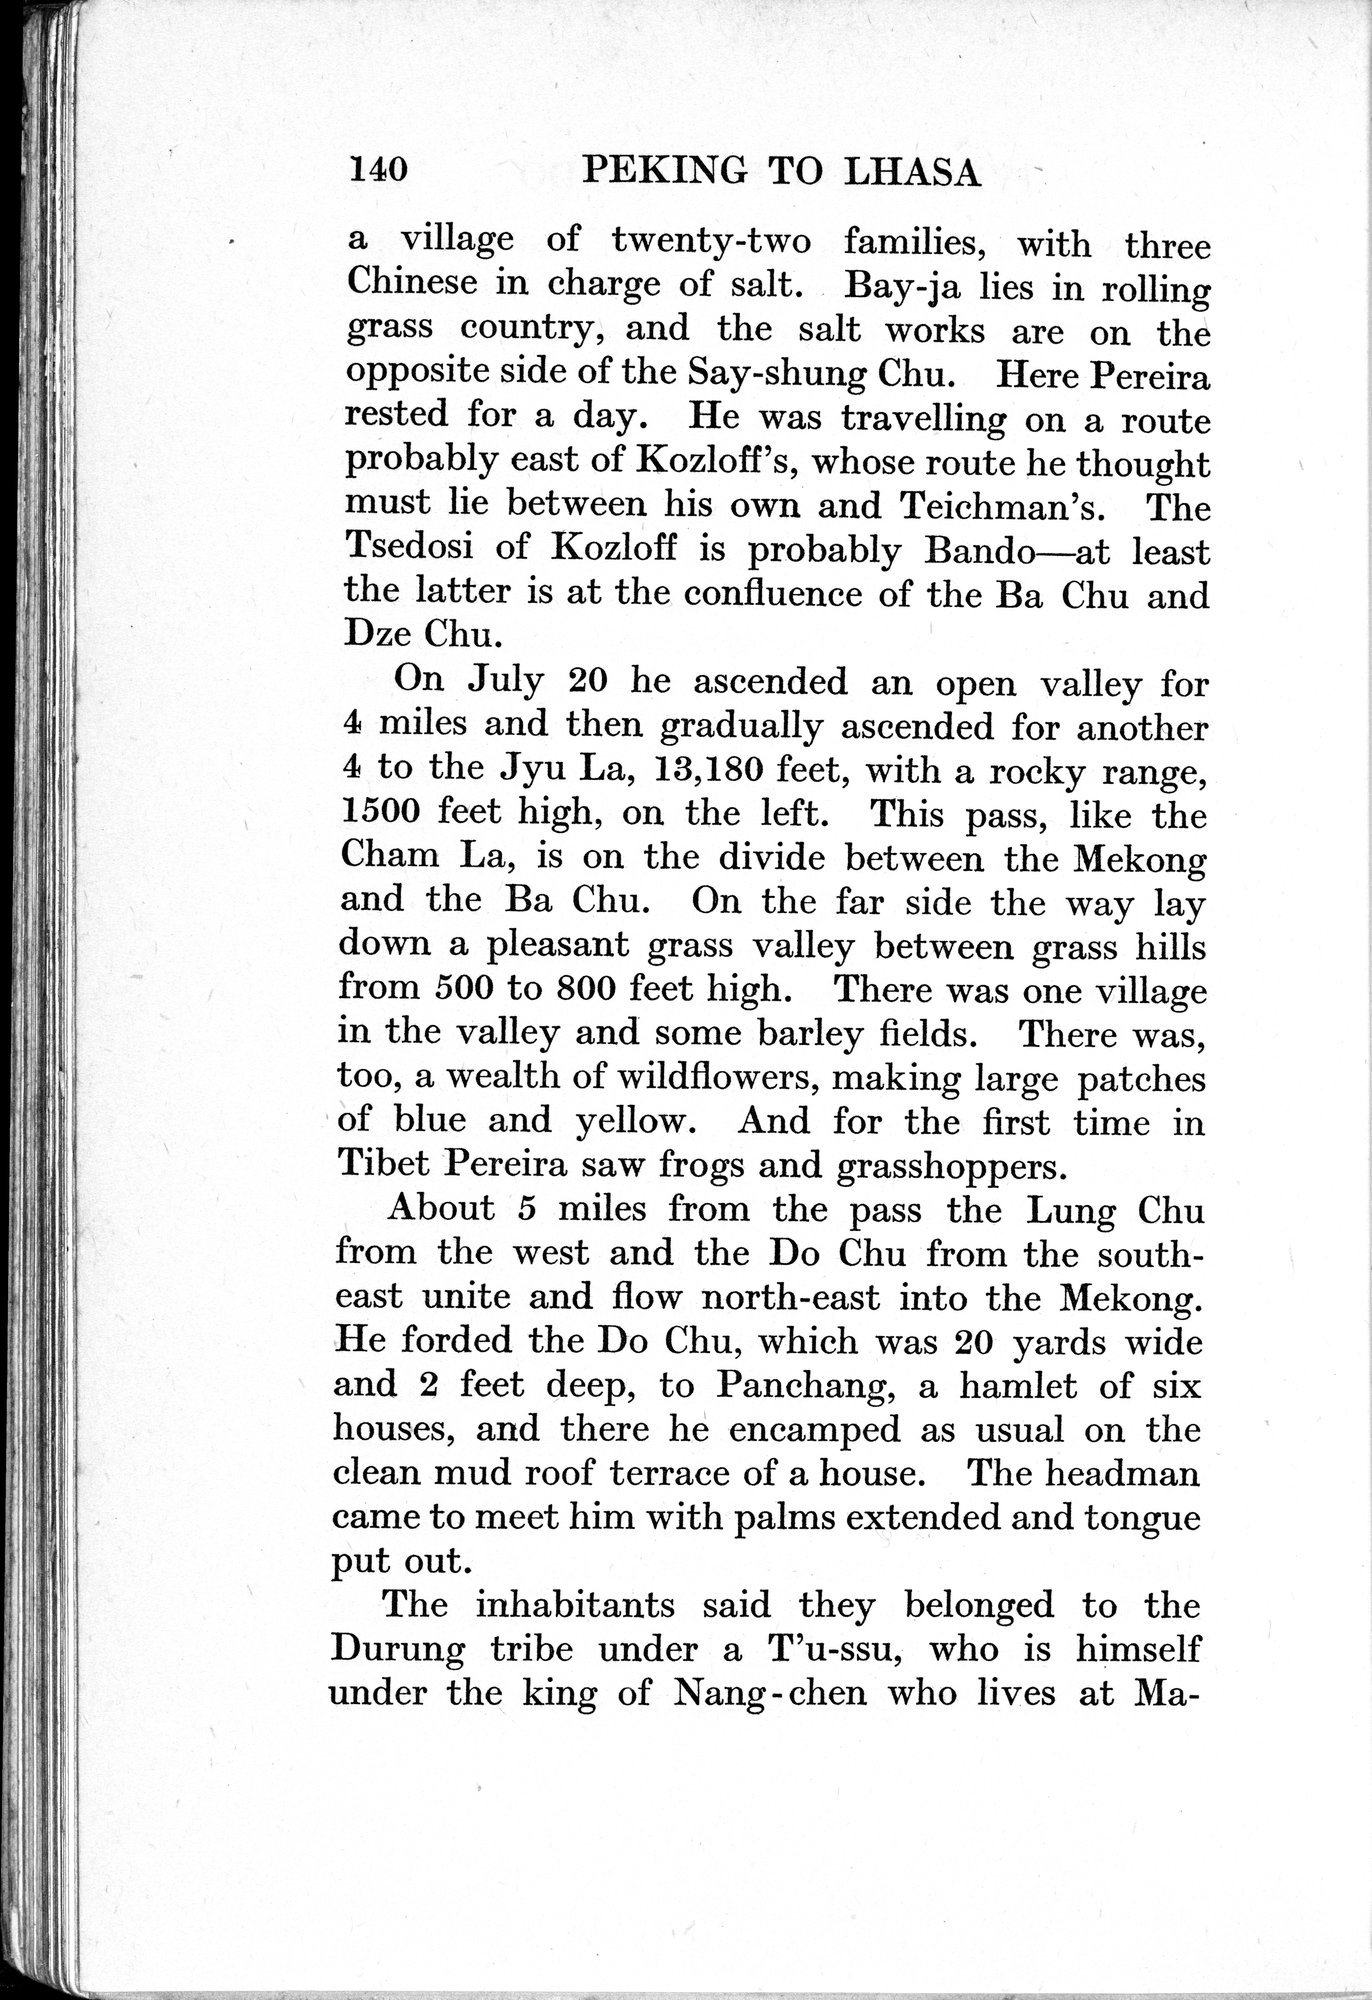 Peking to Lhasa : vol.1 / Page 186 (Grayscale High Resolution Image)